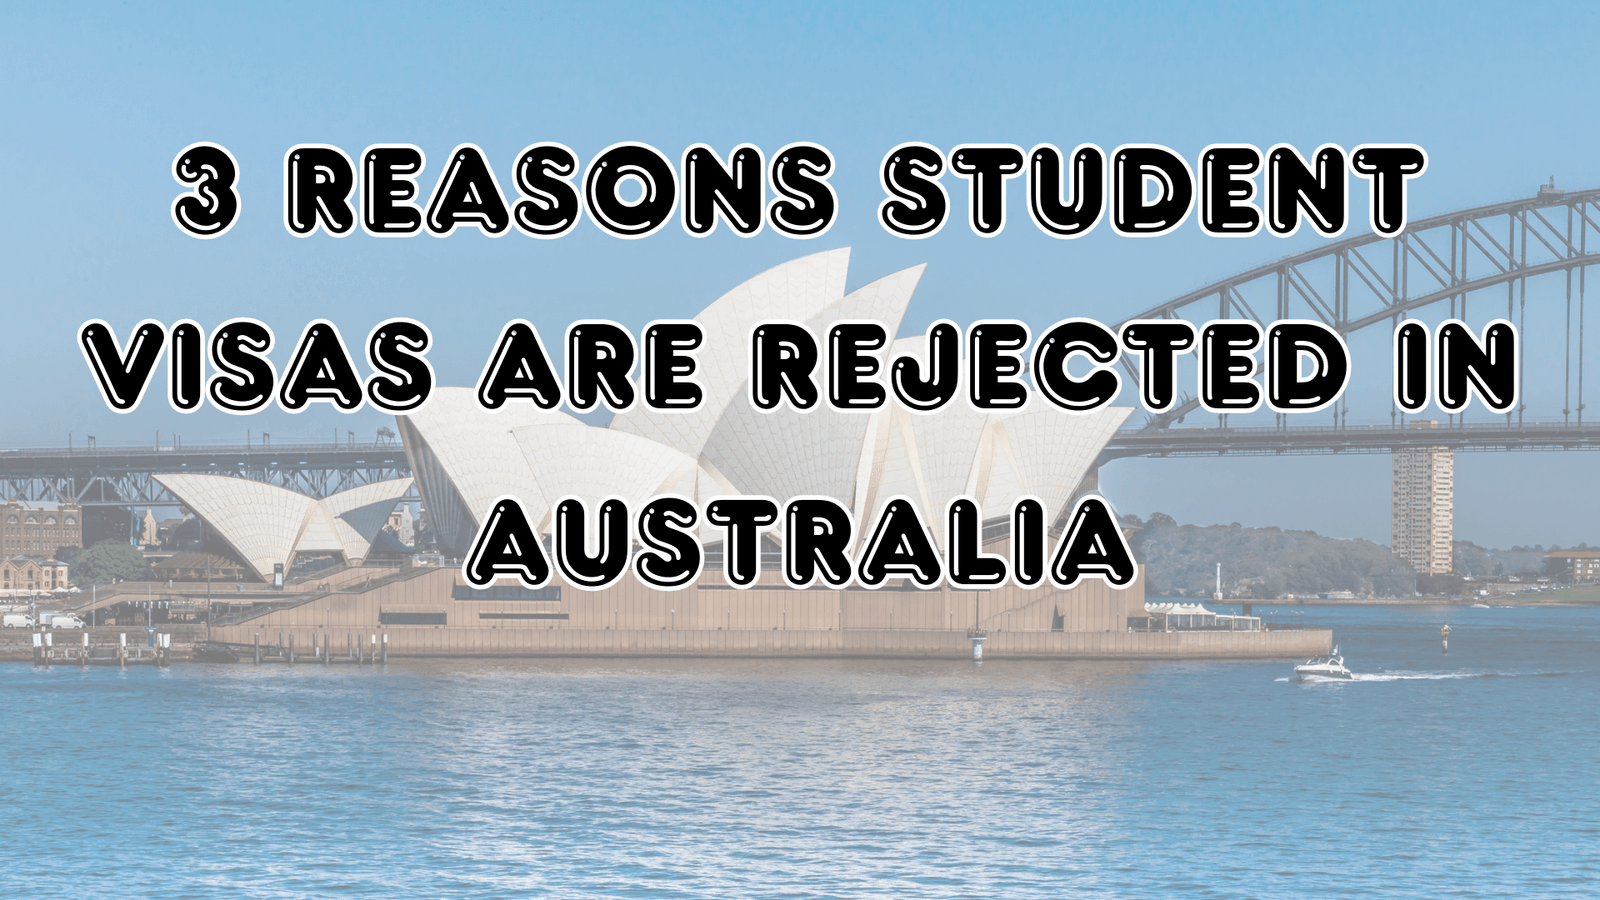 3 Reasons Student Visas are Rejected in Australia